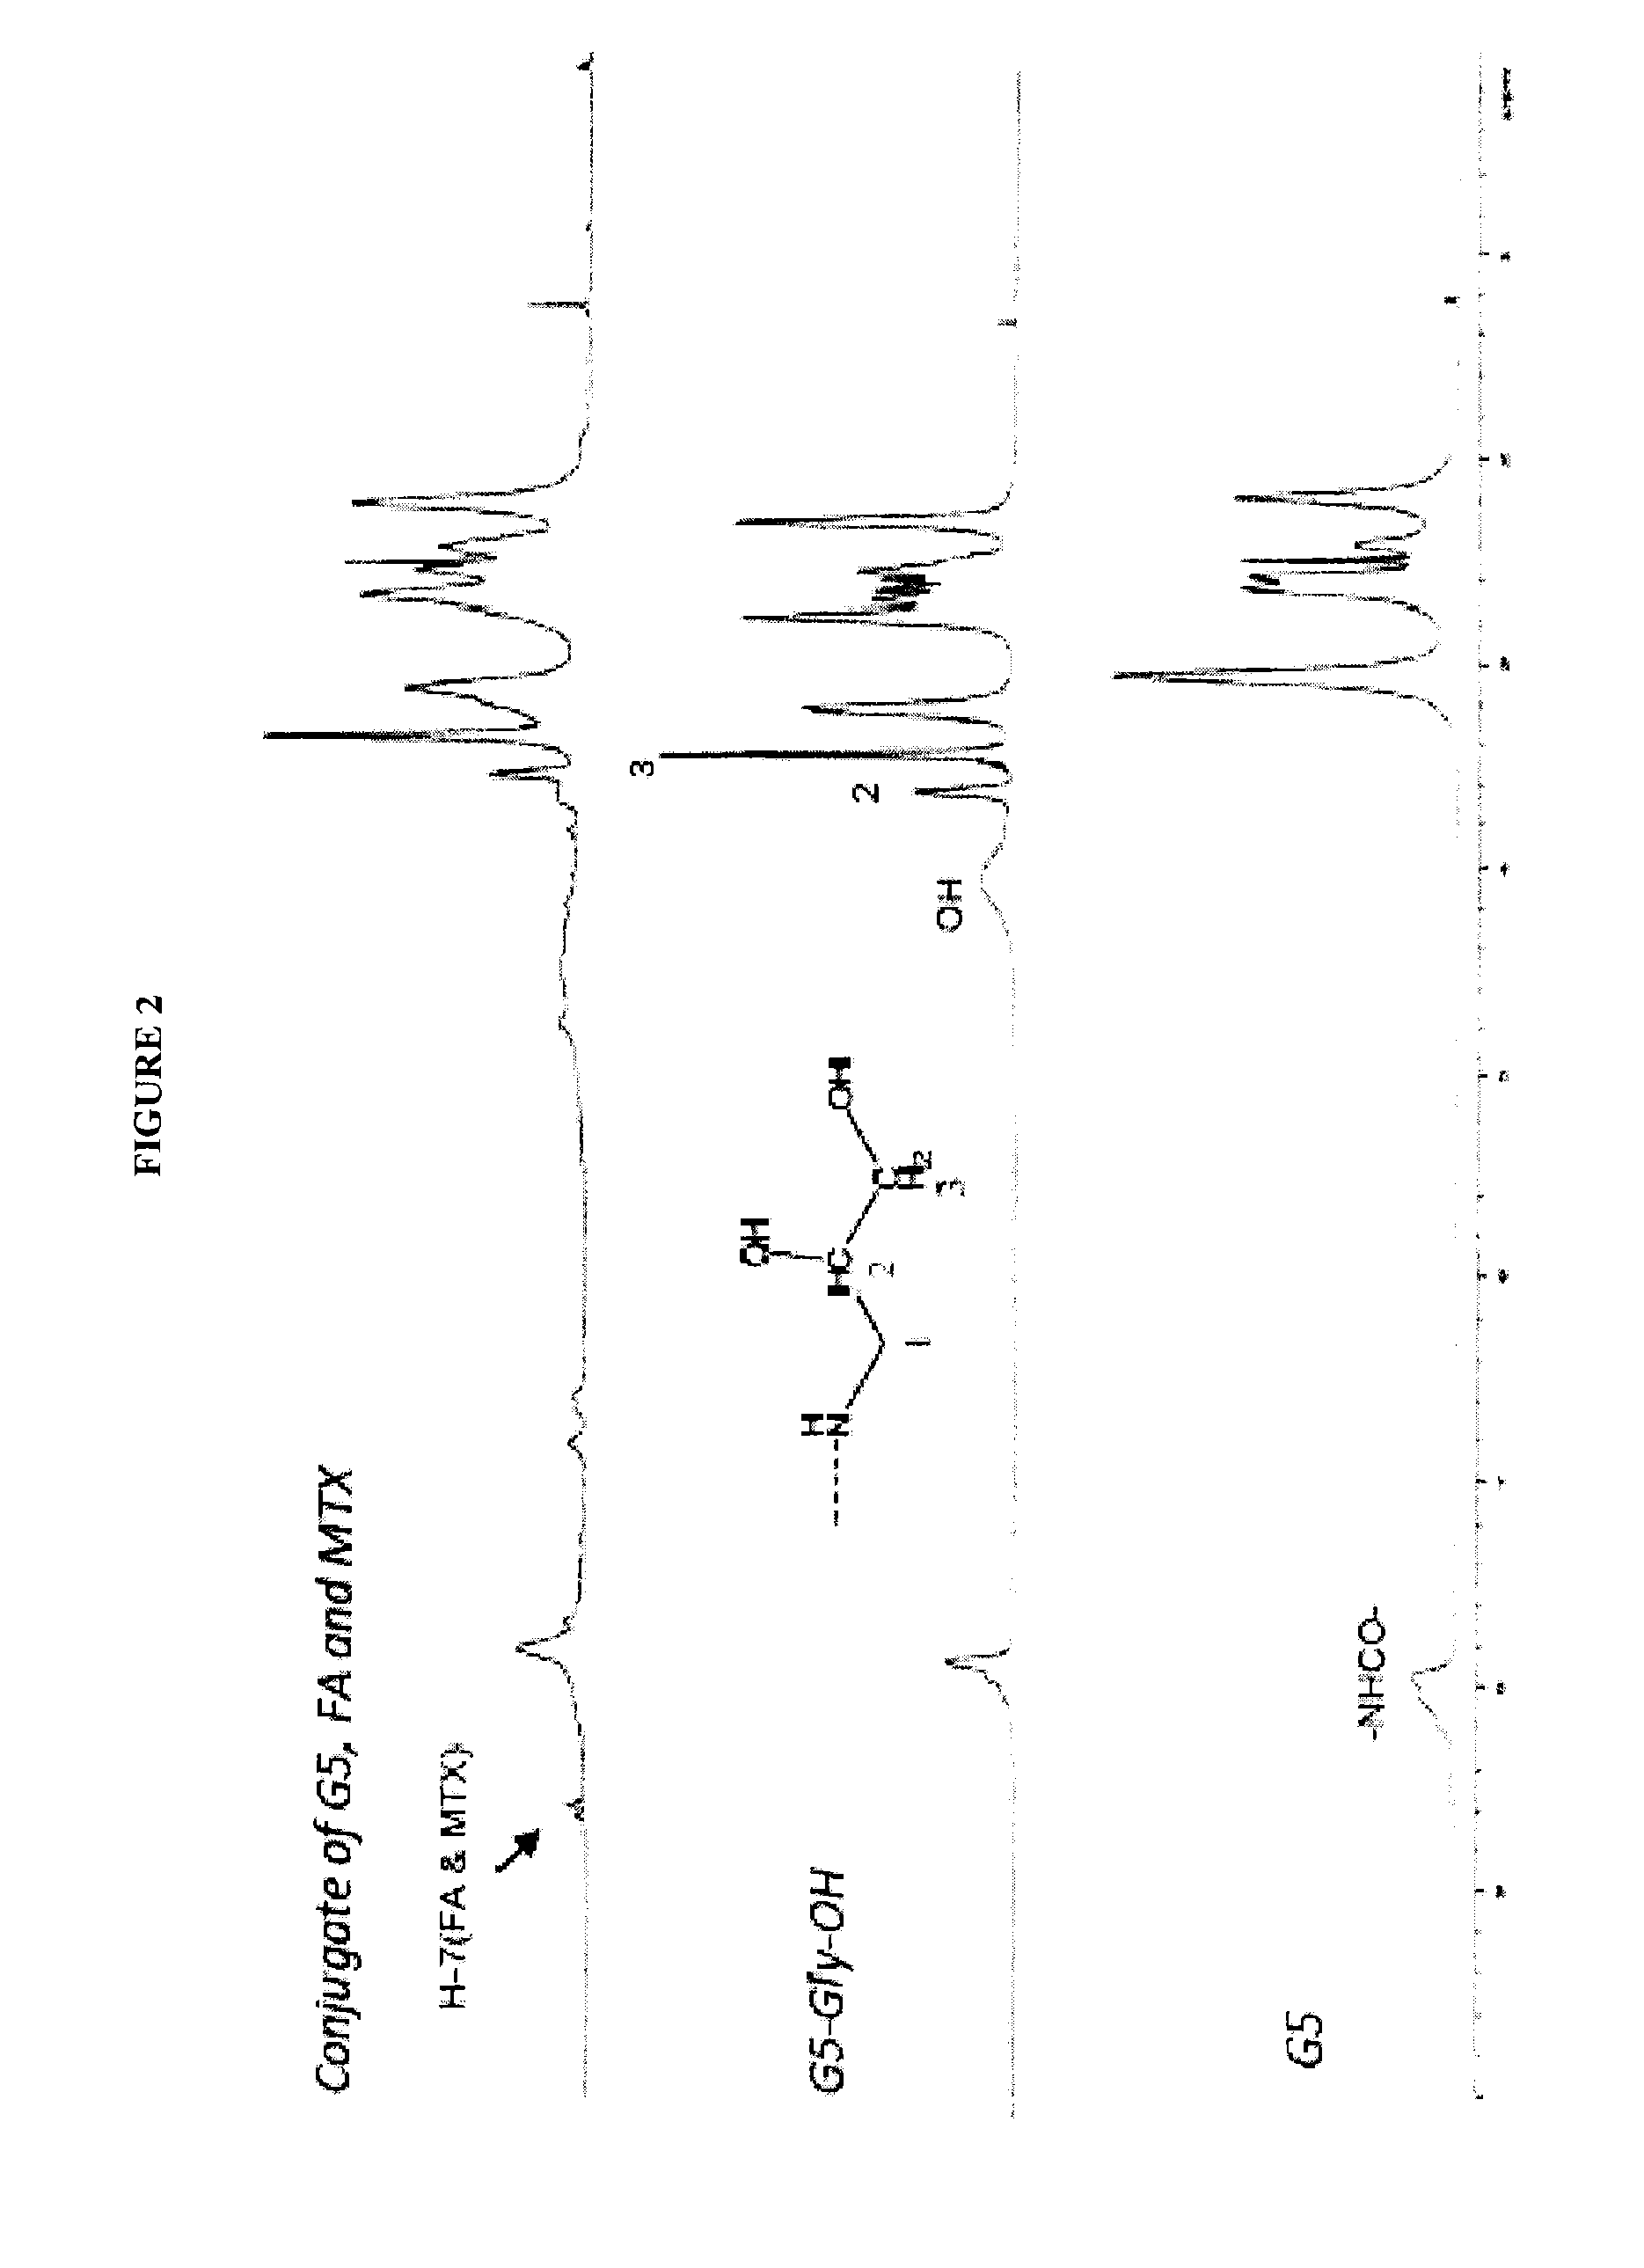 Synthesis of dendrimer conjugates